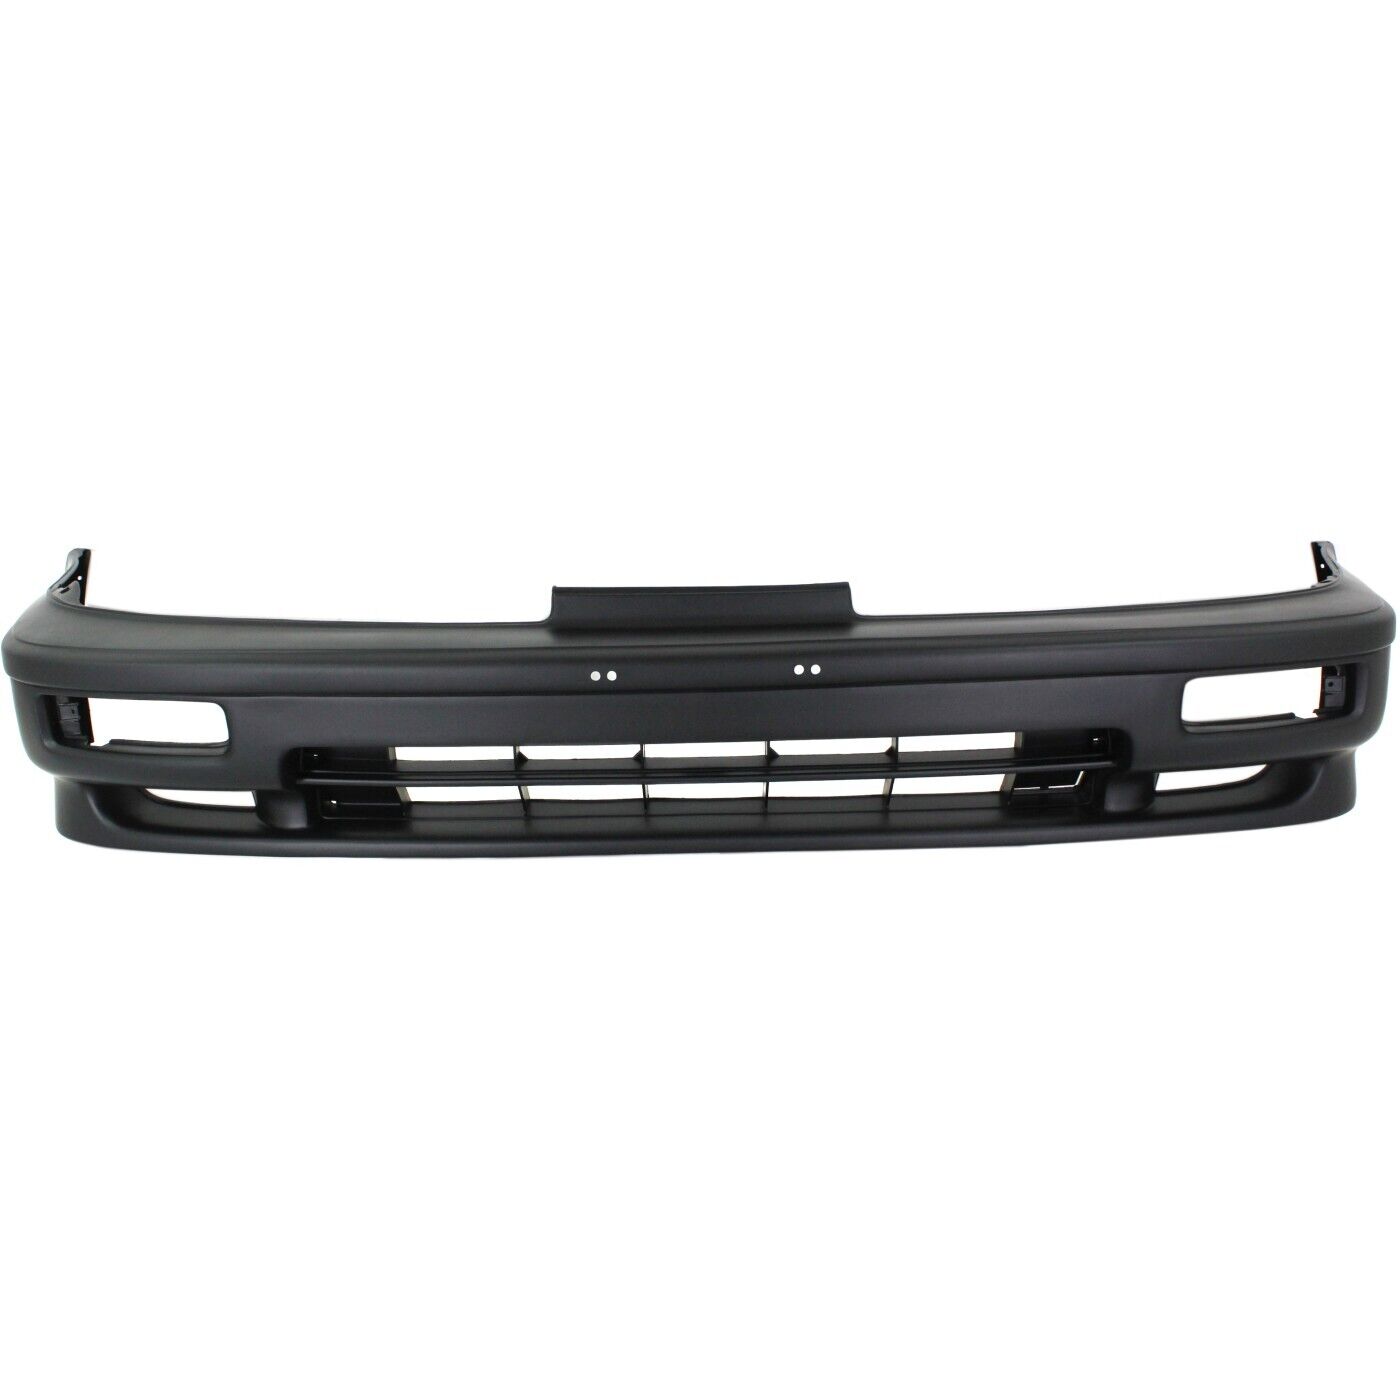 Front Bumper Cover For 90-91 Acura Integra w/ fog lamp holes Primed